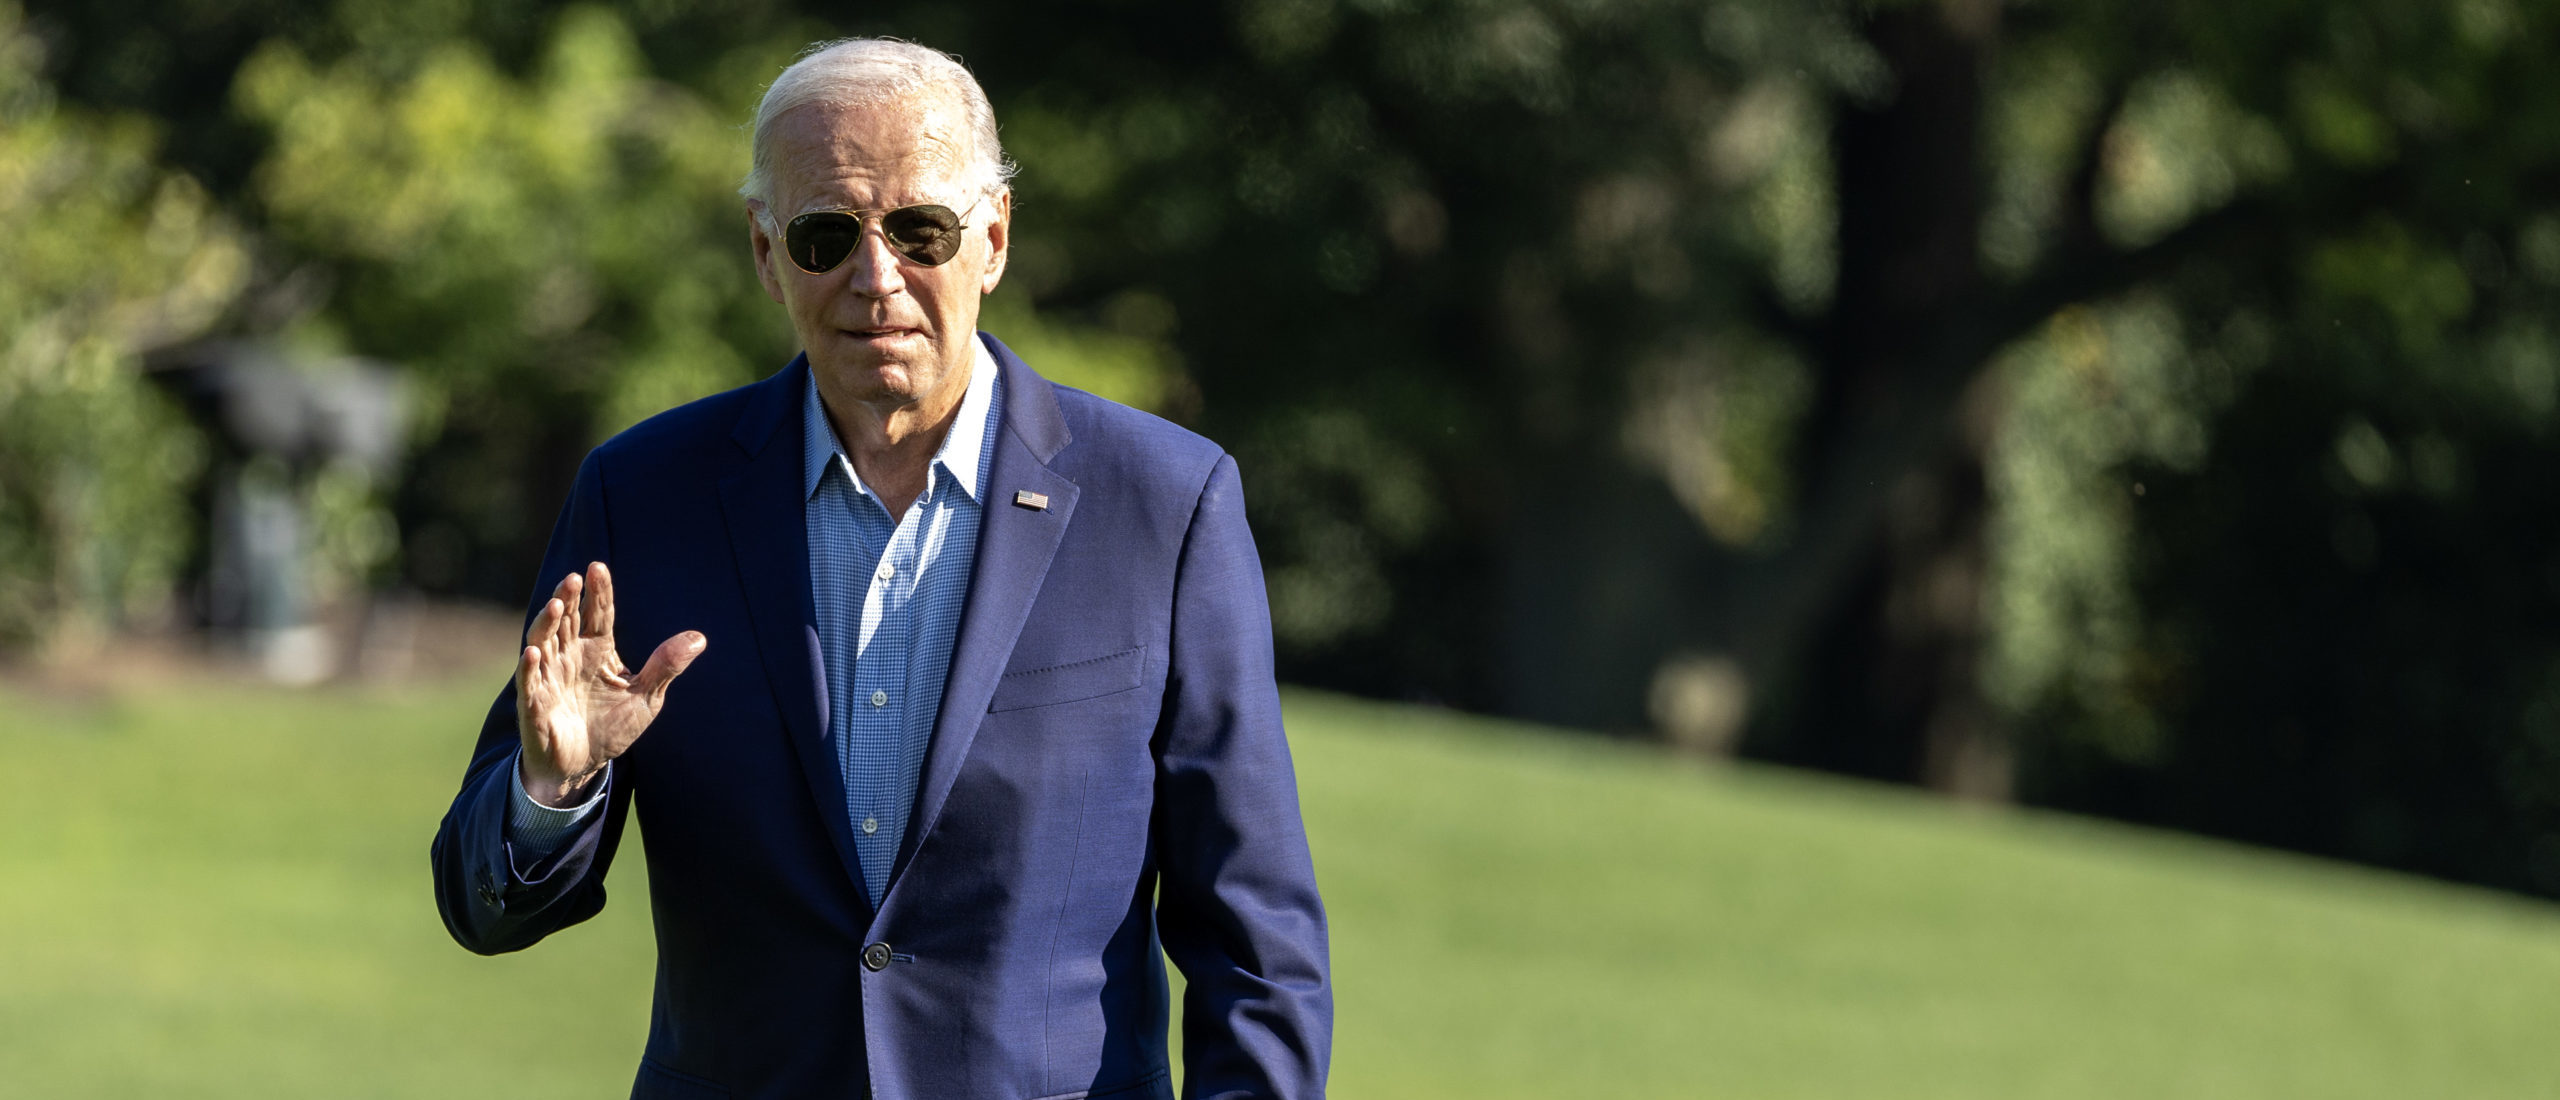 WASHINGTON, DC - SEPTEMBER 04: U.S. President Joe Biden walks on the south lawn of the White House on September 04, 2023 in Washington, DC. President Joe Bide spent Labor Day with American workers, at an event in Philadelphia, Pennsylvania. (Photo by Tasos Katopodis/Getty Images)